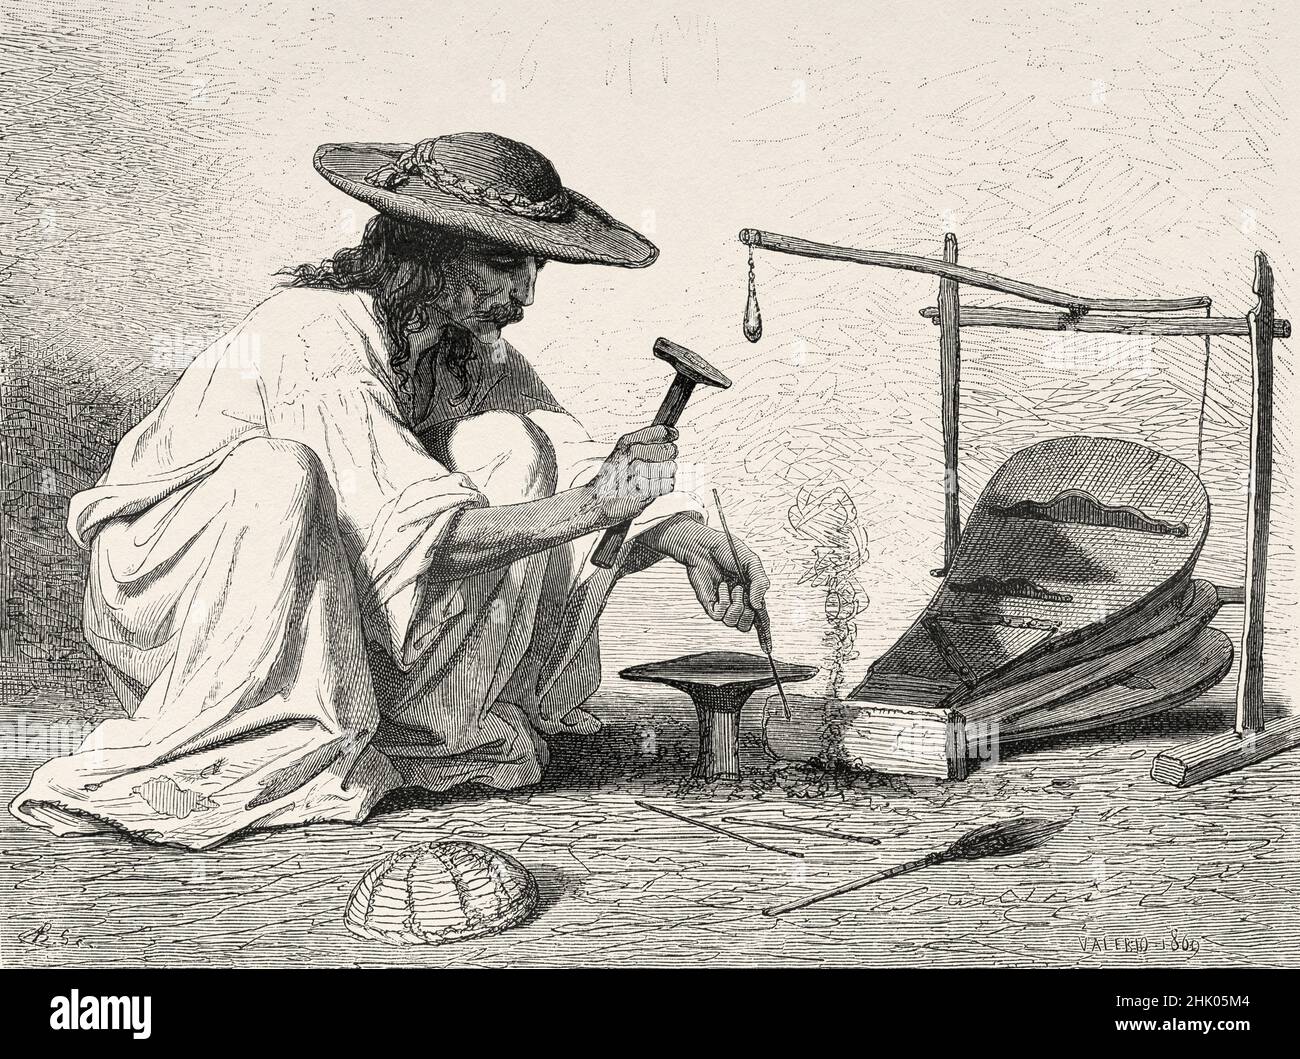 Gypsy blacksmith, Slavonija region of Croatia, Europe. Old 19th century engraved illustration from Voyage to the Southern Slavs by Georges Perrot, Le Tour du Monde 1870 Stock Photo